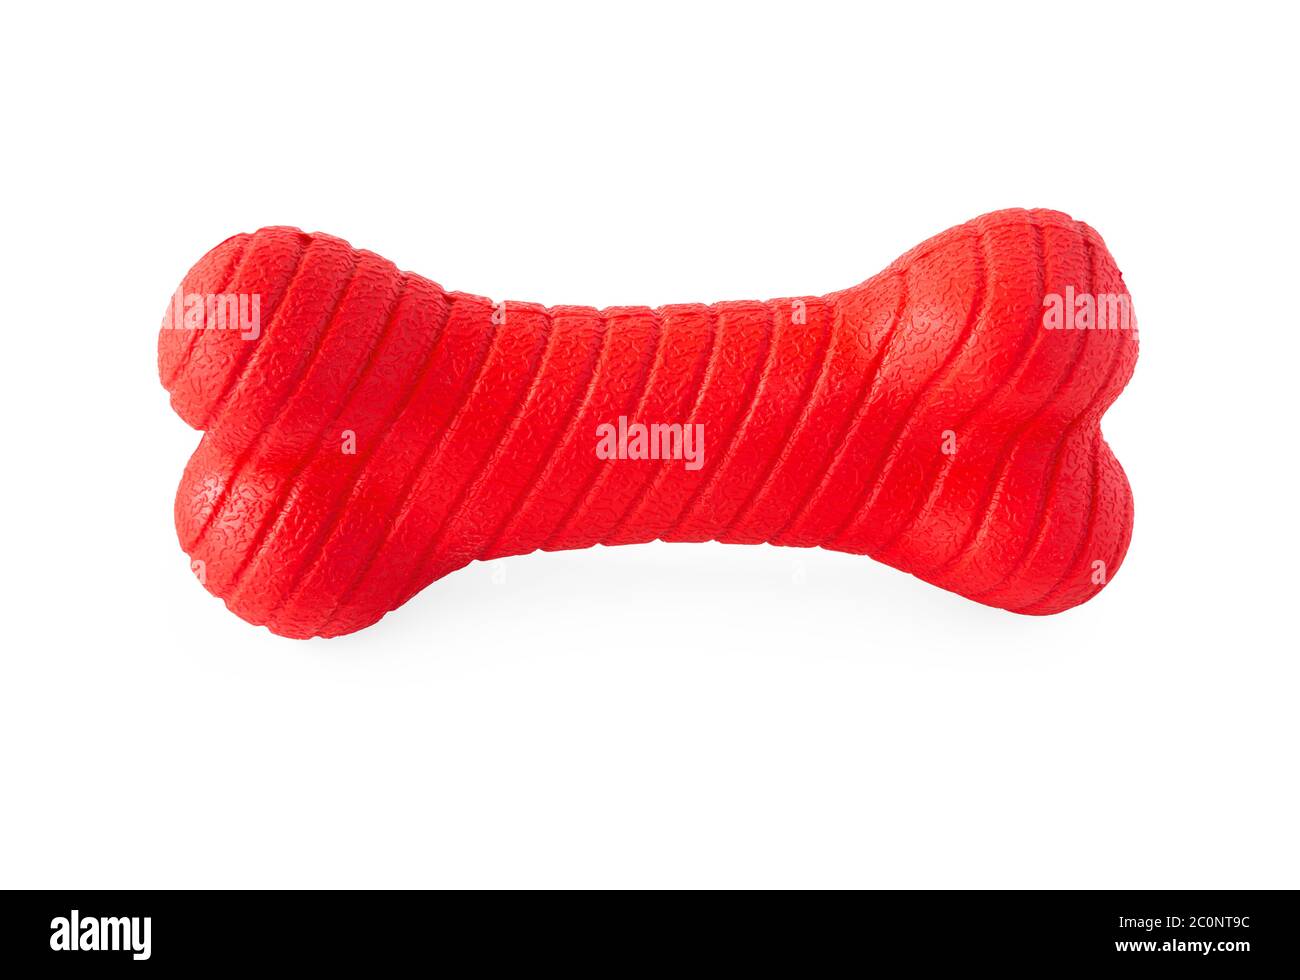 A dogs red rubber chewing bone on white. Stock Photo